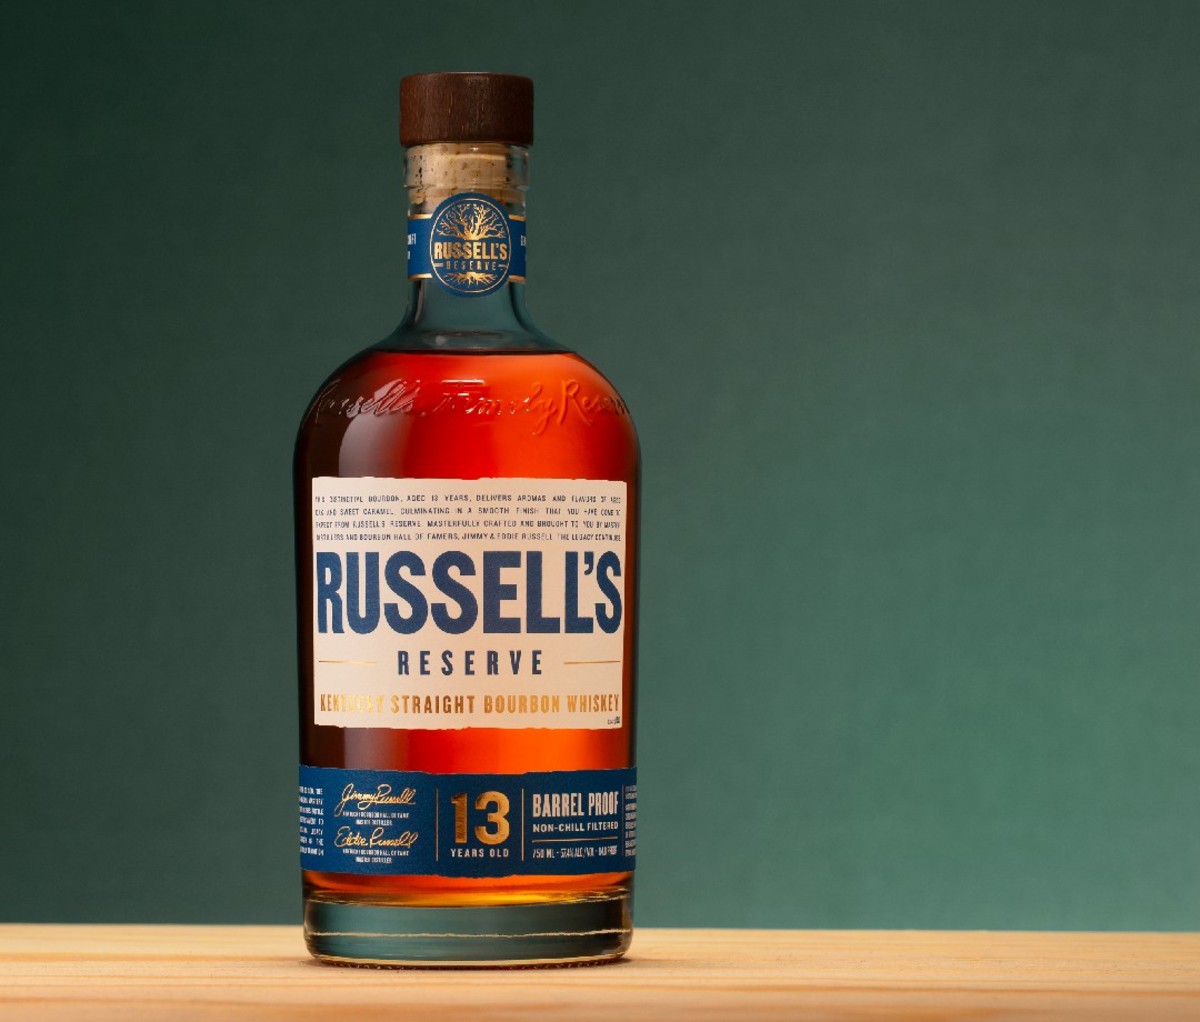 Bottle of Russell’s Reserve 13-Year-Old bourbon against green backdrop